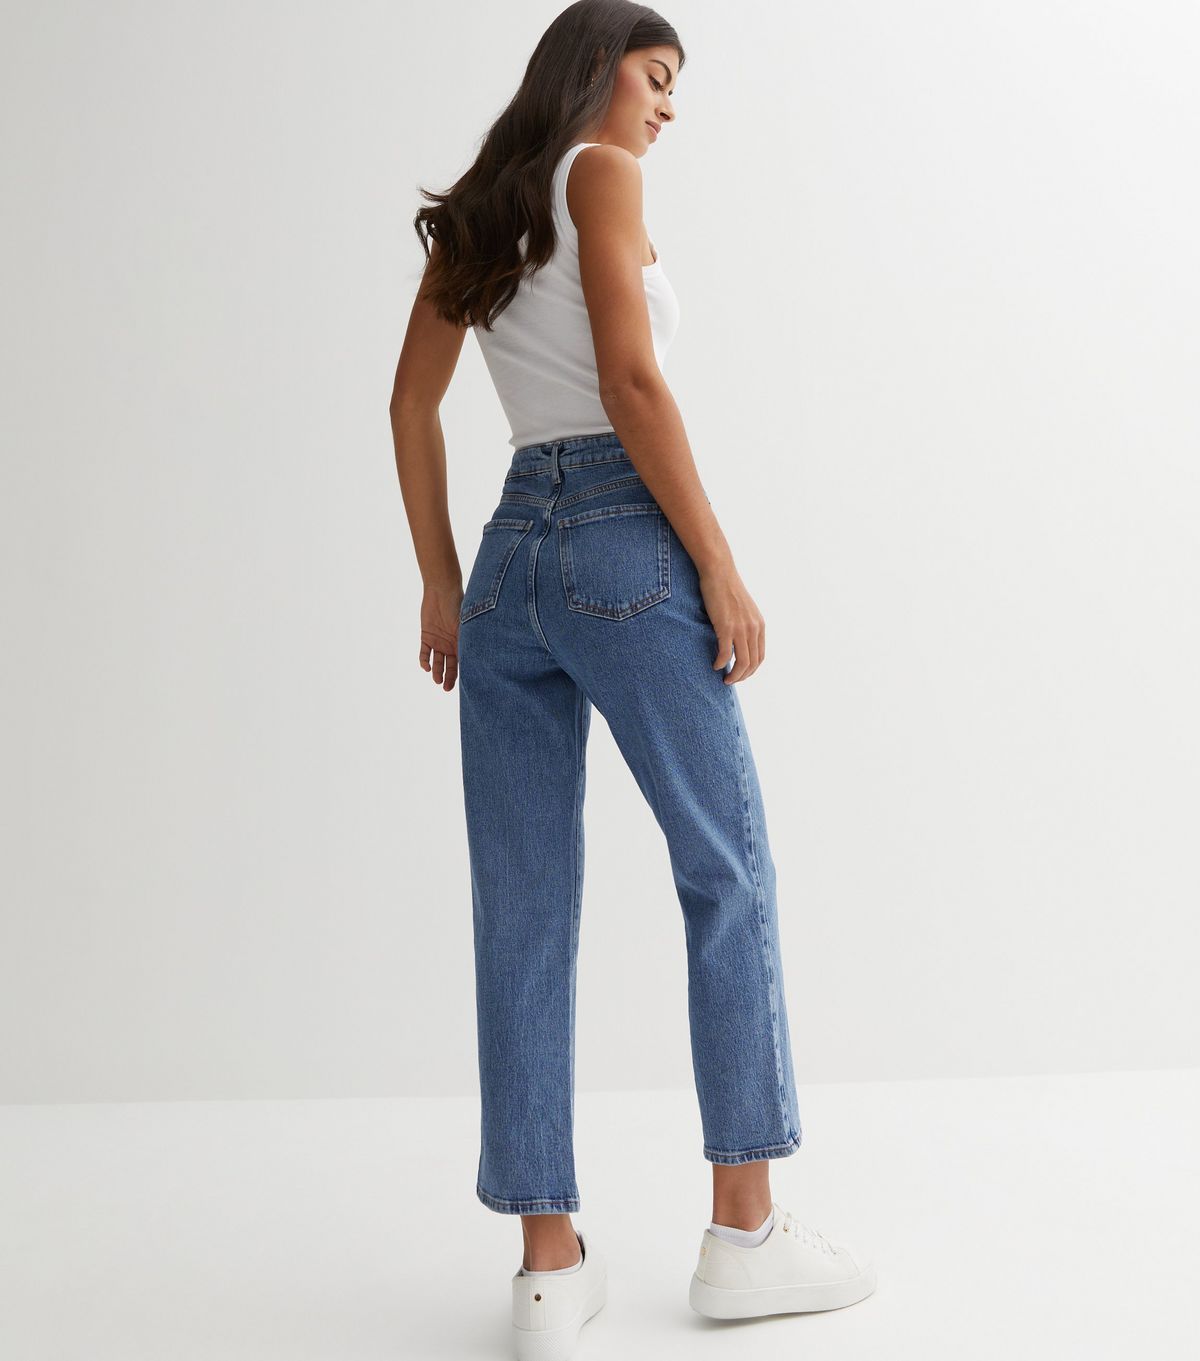 Blue Ankle Grazing Hannah Straight Leg Jeans
						
						Add to Saved Items
						Remove from Sa... | New Look (UK)